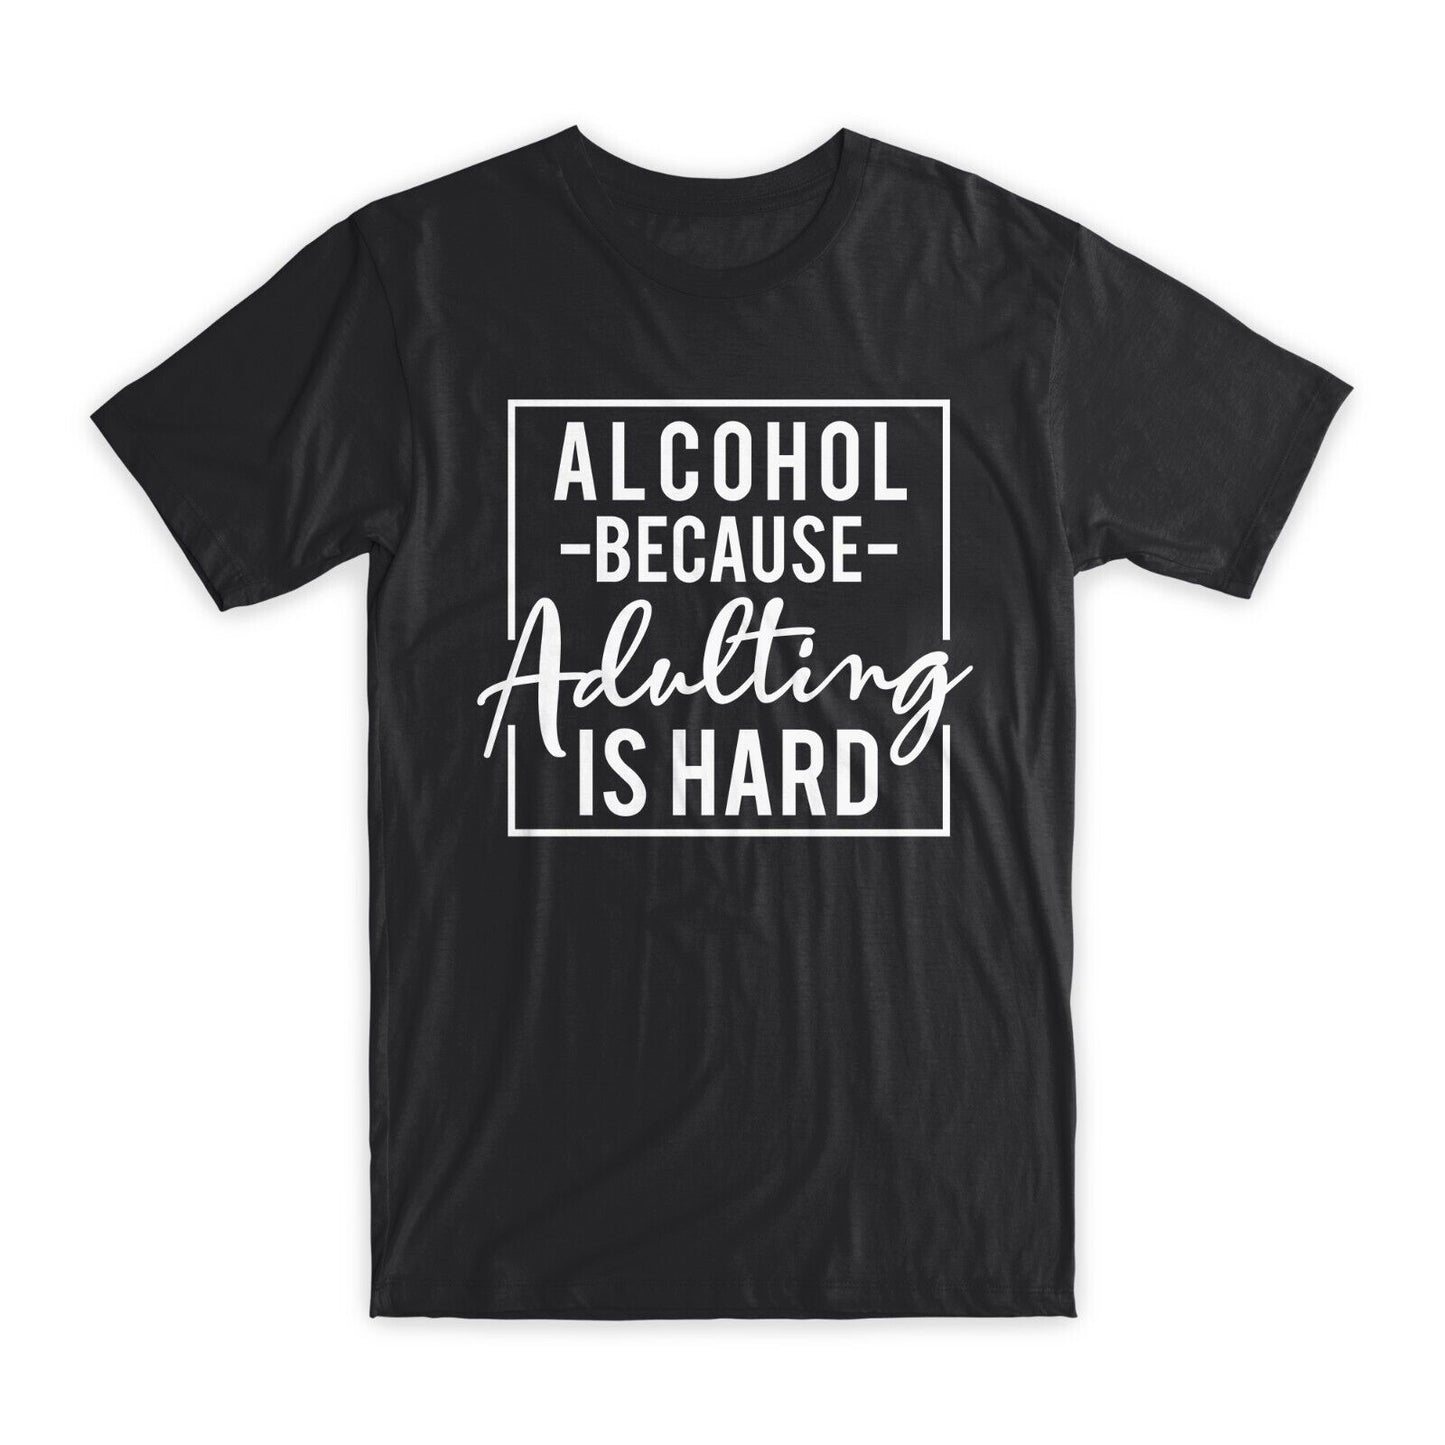 Alcohol Because Adulting is Hard T-Shirt Premium Soft Cotton Funny Tees Gift NEW